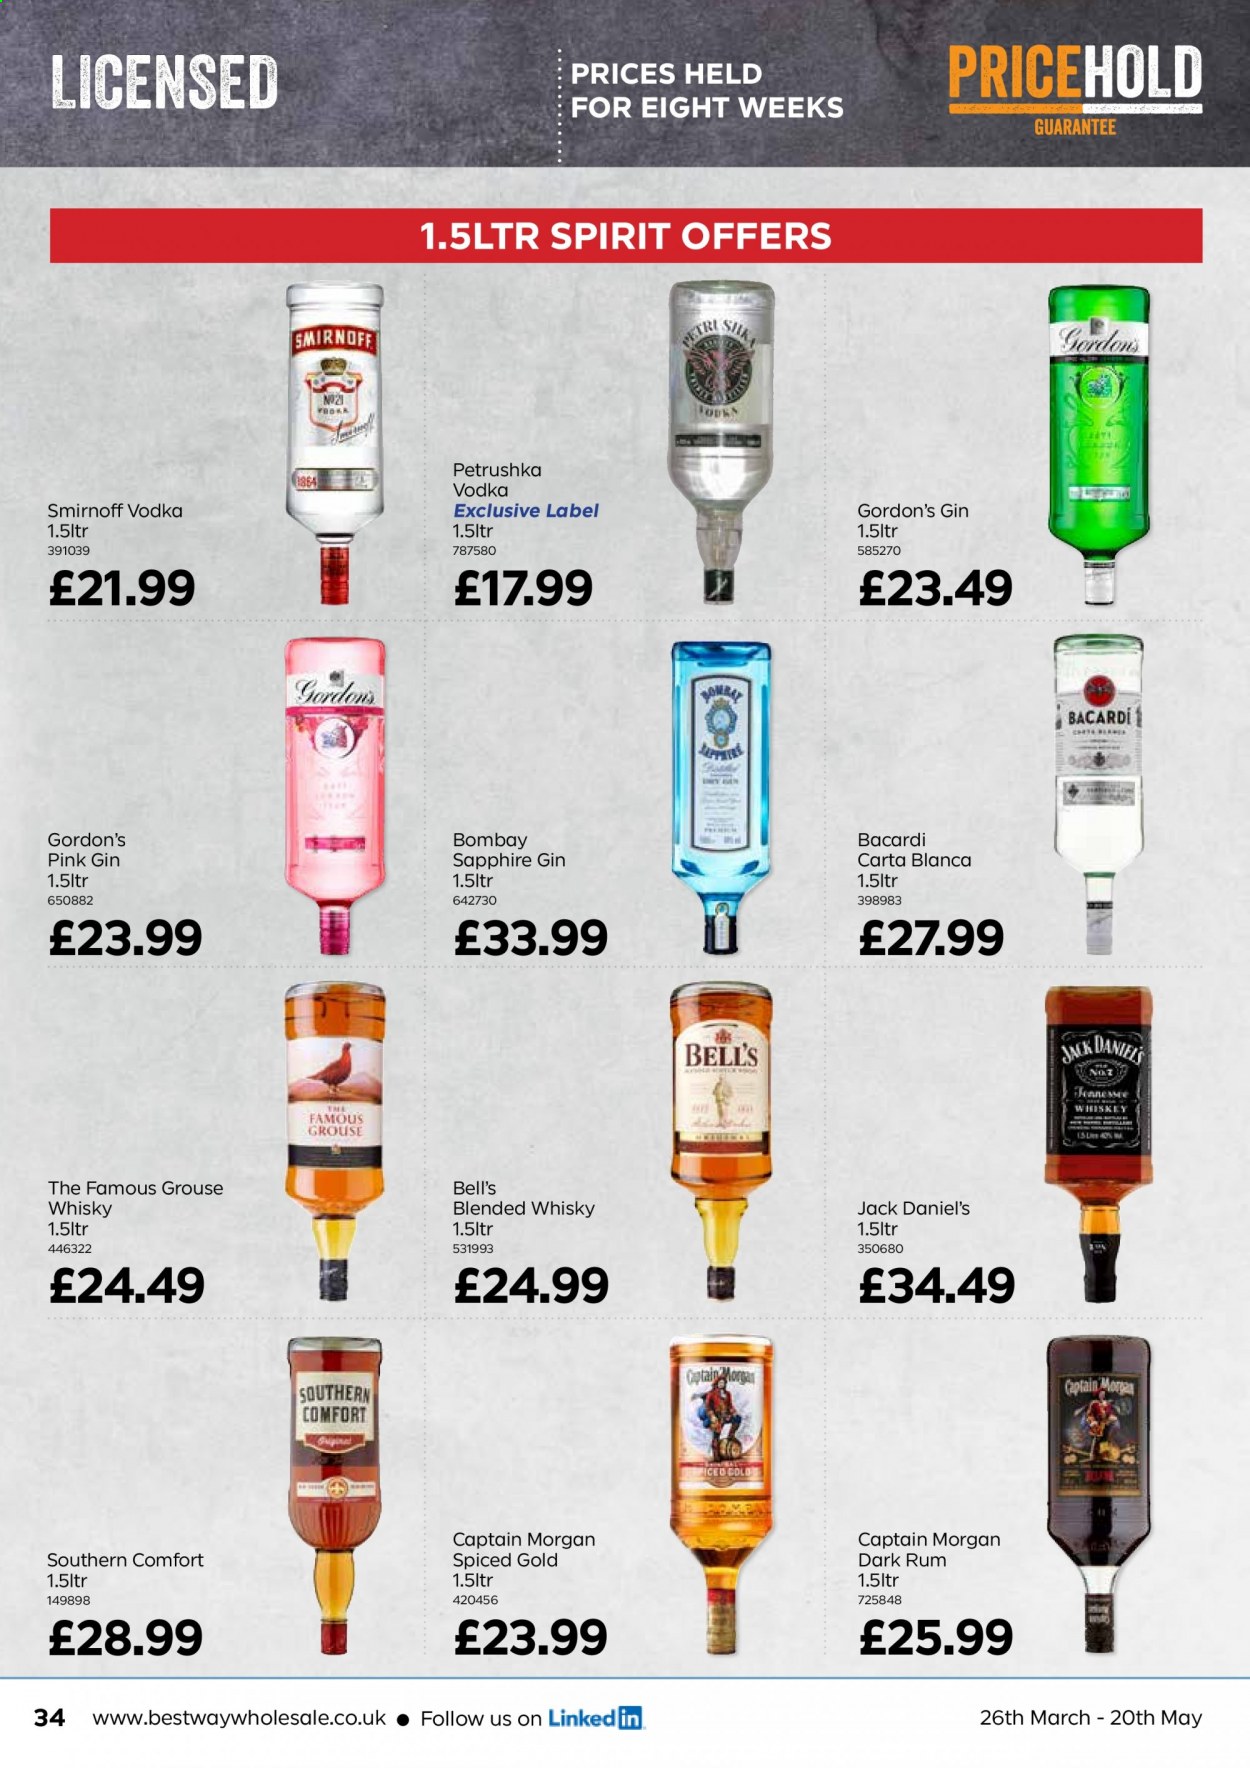 thumbnail - Bestway offer  - 26/03/2021 - 20/05/2021 - Sales products - Bacardi, Captain Morgan, gin, Smirnoff, vodka, whiskey, Jack Daniel's, Gordon's, rum, The Famous Grouse, whisky. Page 34.